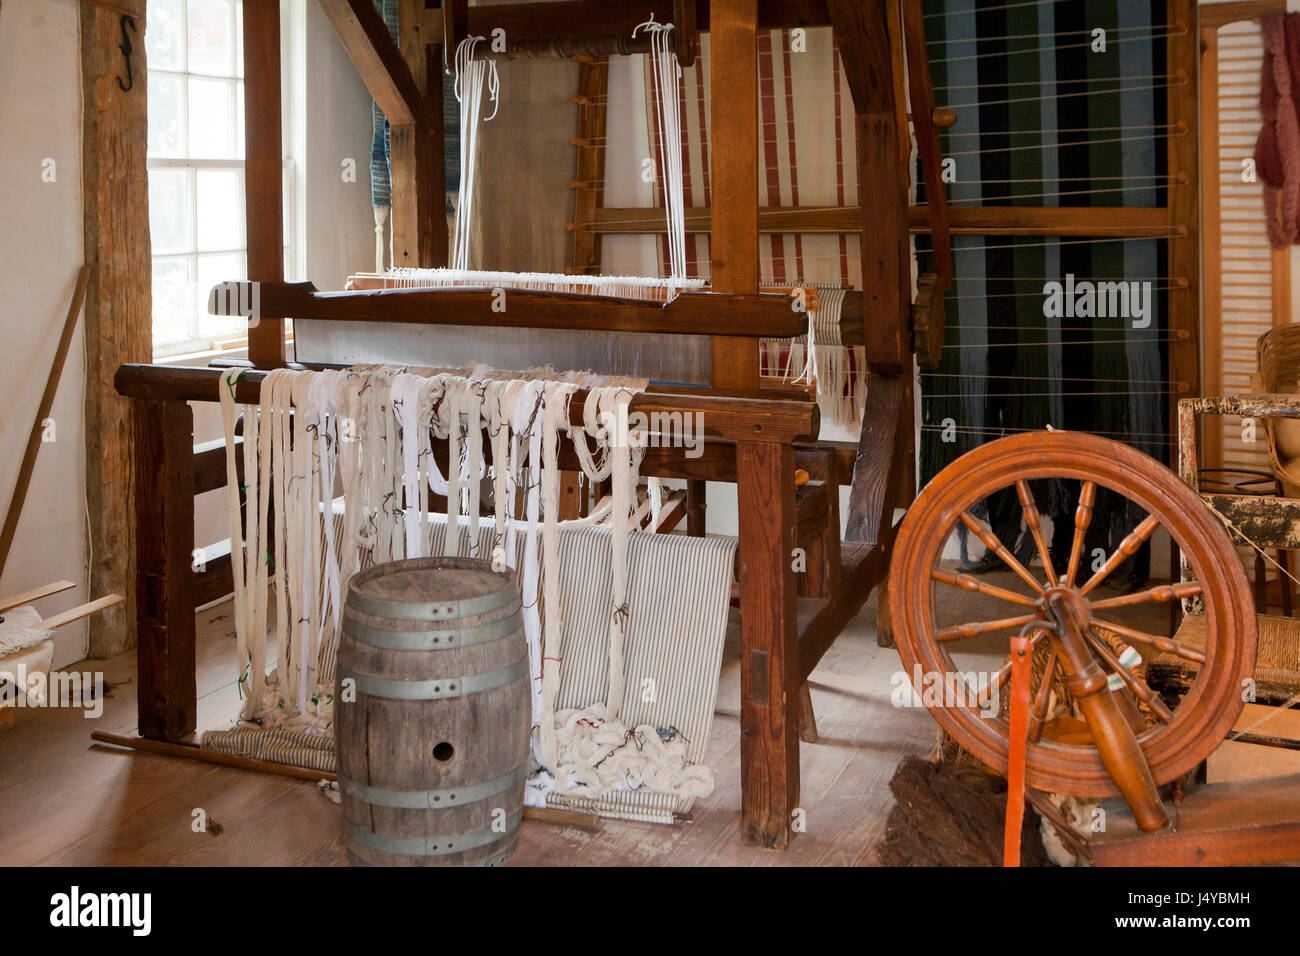 Depiction of a weaver's cottage in the 18th century colonial America - USA Stock Photo